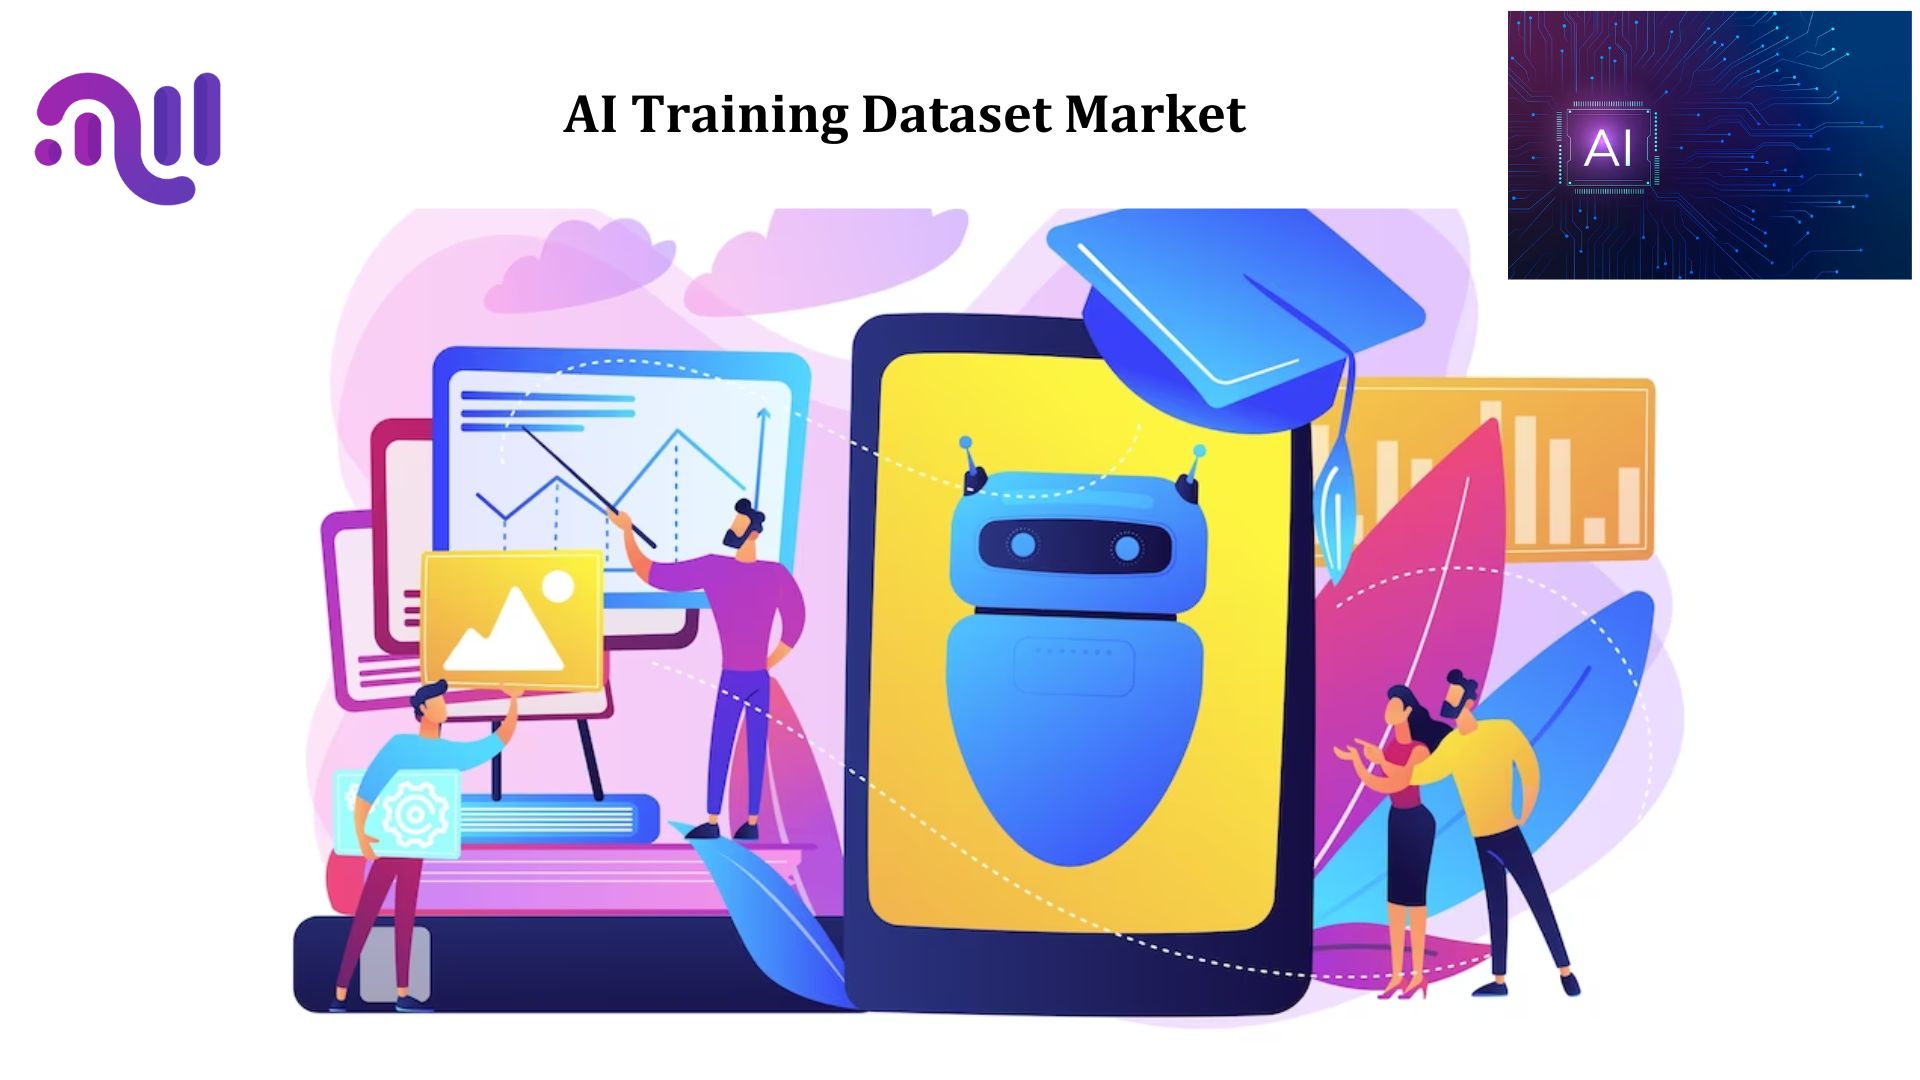 AI Training Dataset Market Expected To Achieve USD 11.7 Bn In Revenues By 2032, Driven By A 20.5% CAGR